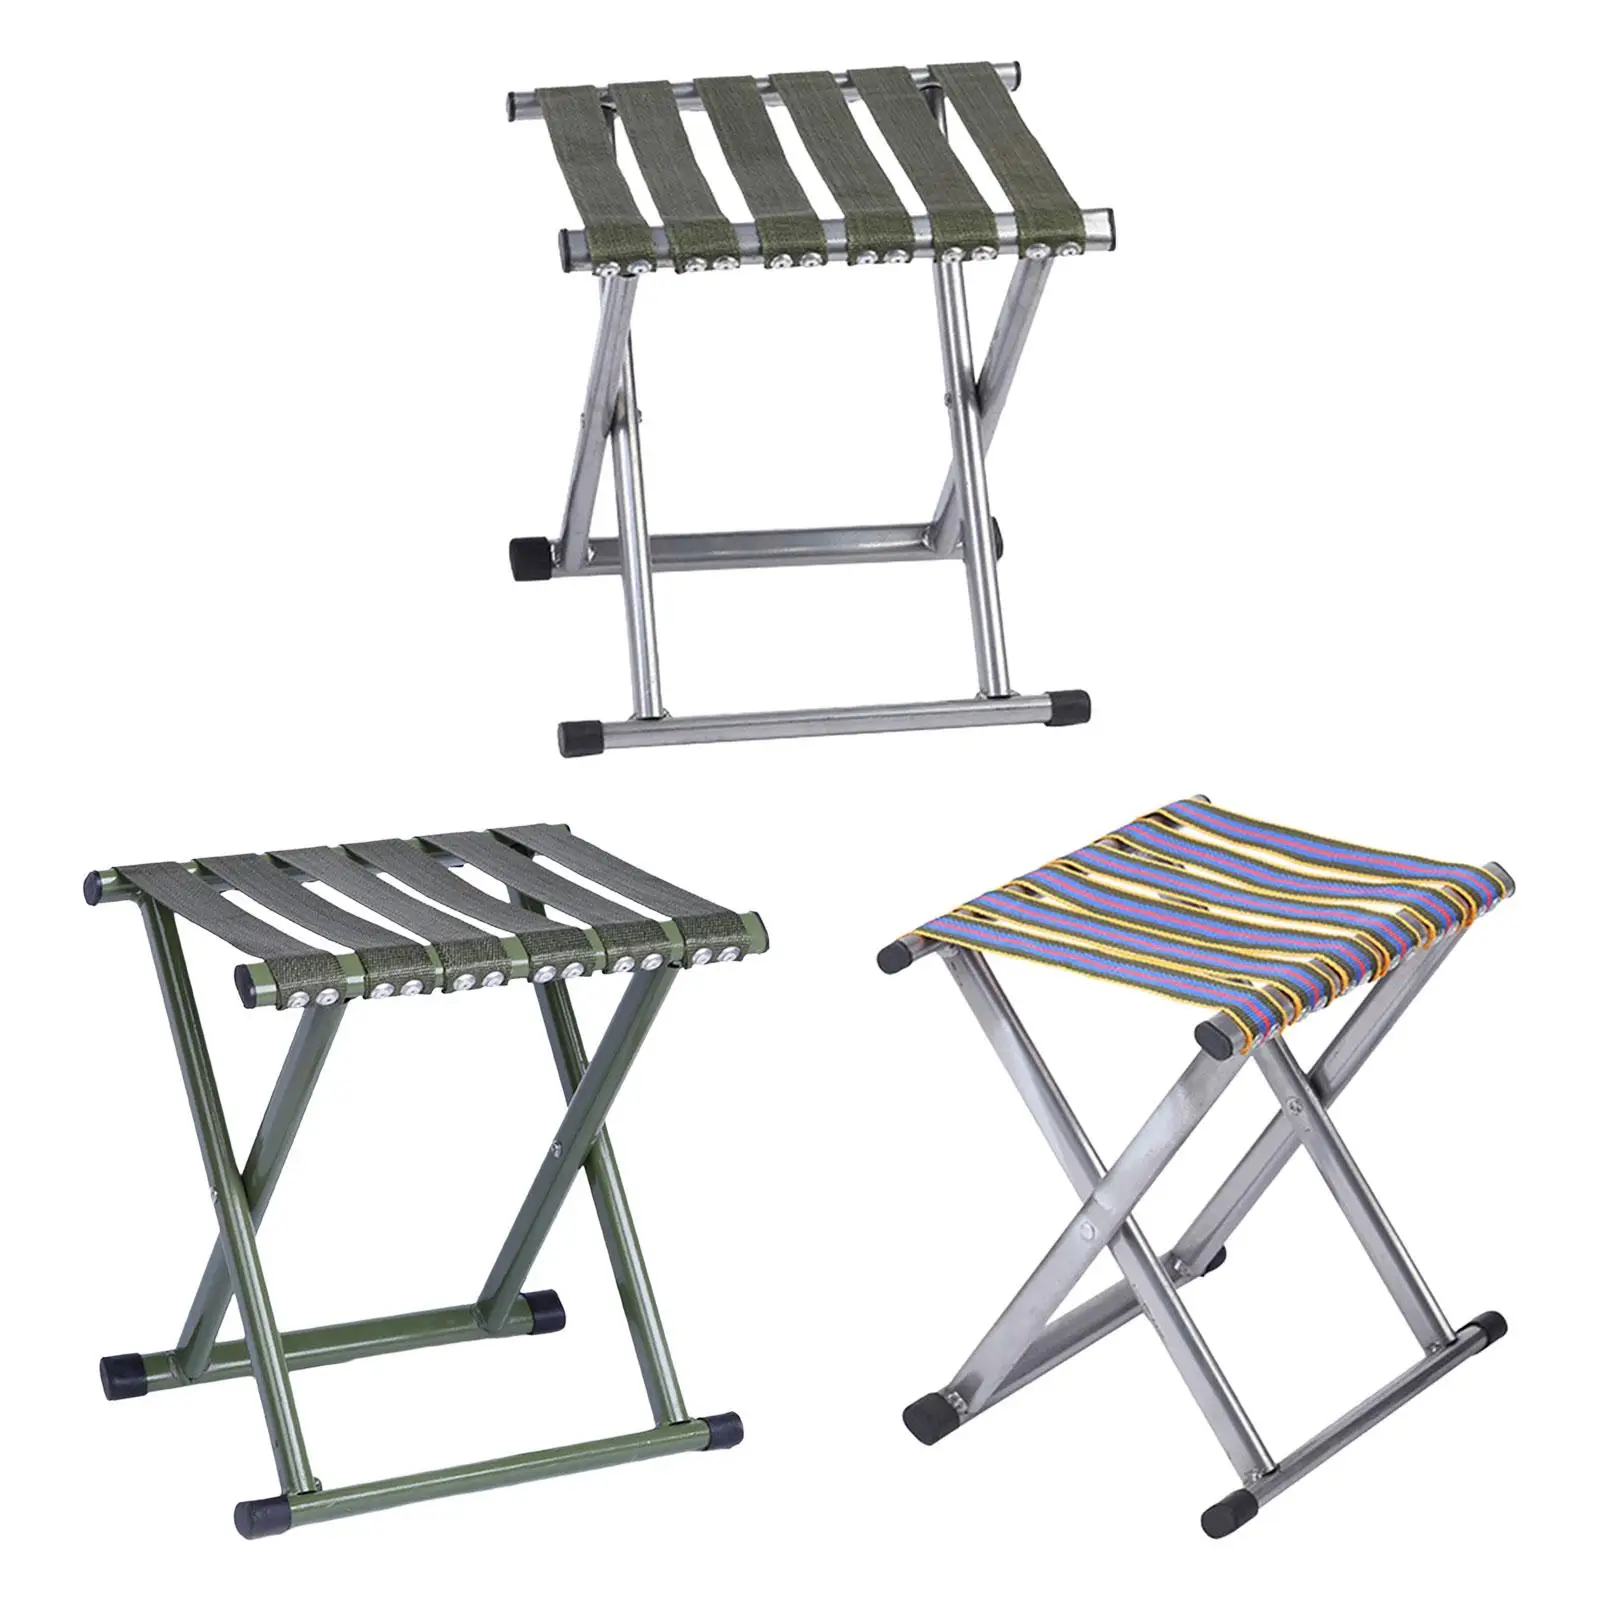 Folding Camping Stool Fishing Chair Foot Stool Footrest Collapsible Stool Saddle Chair for BBQ Sports Gardening Picnic